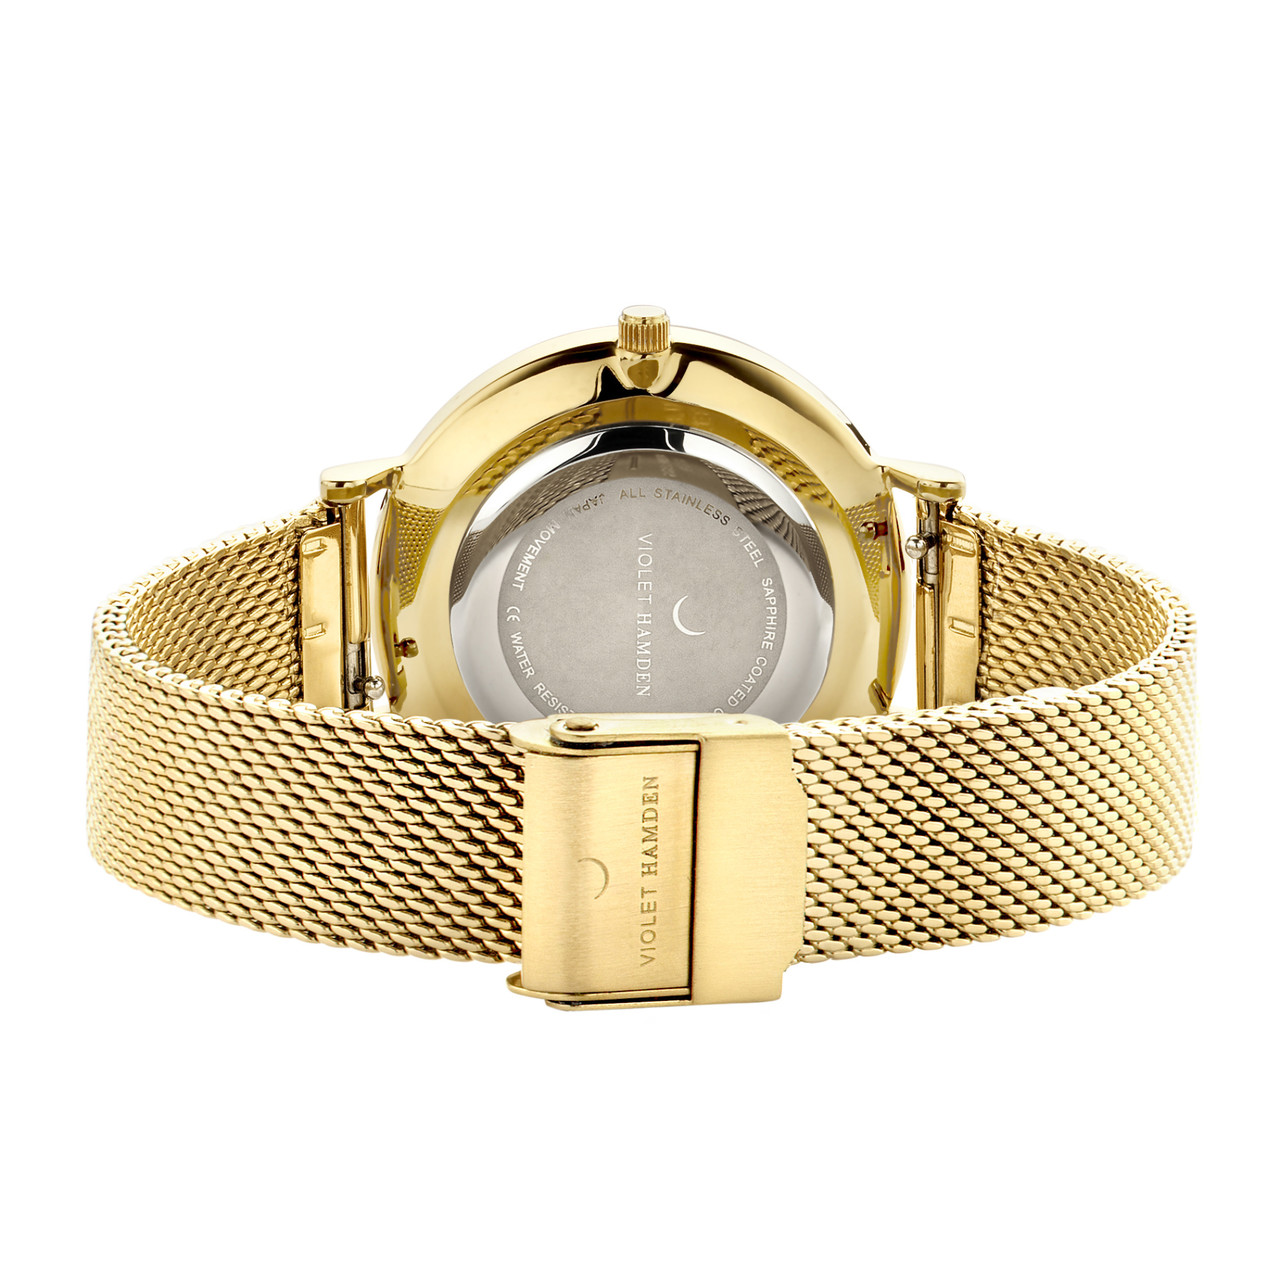 Day & Night round ladies watch gold coloured and white